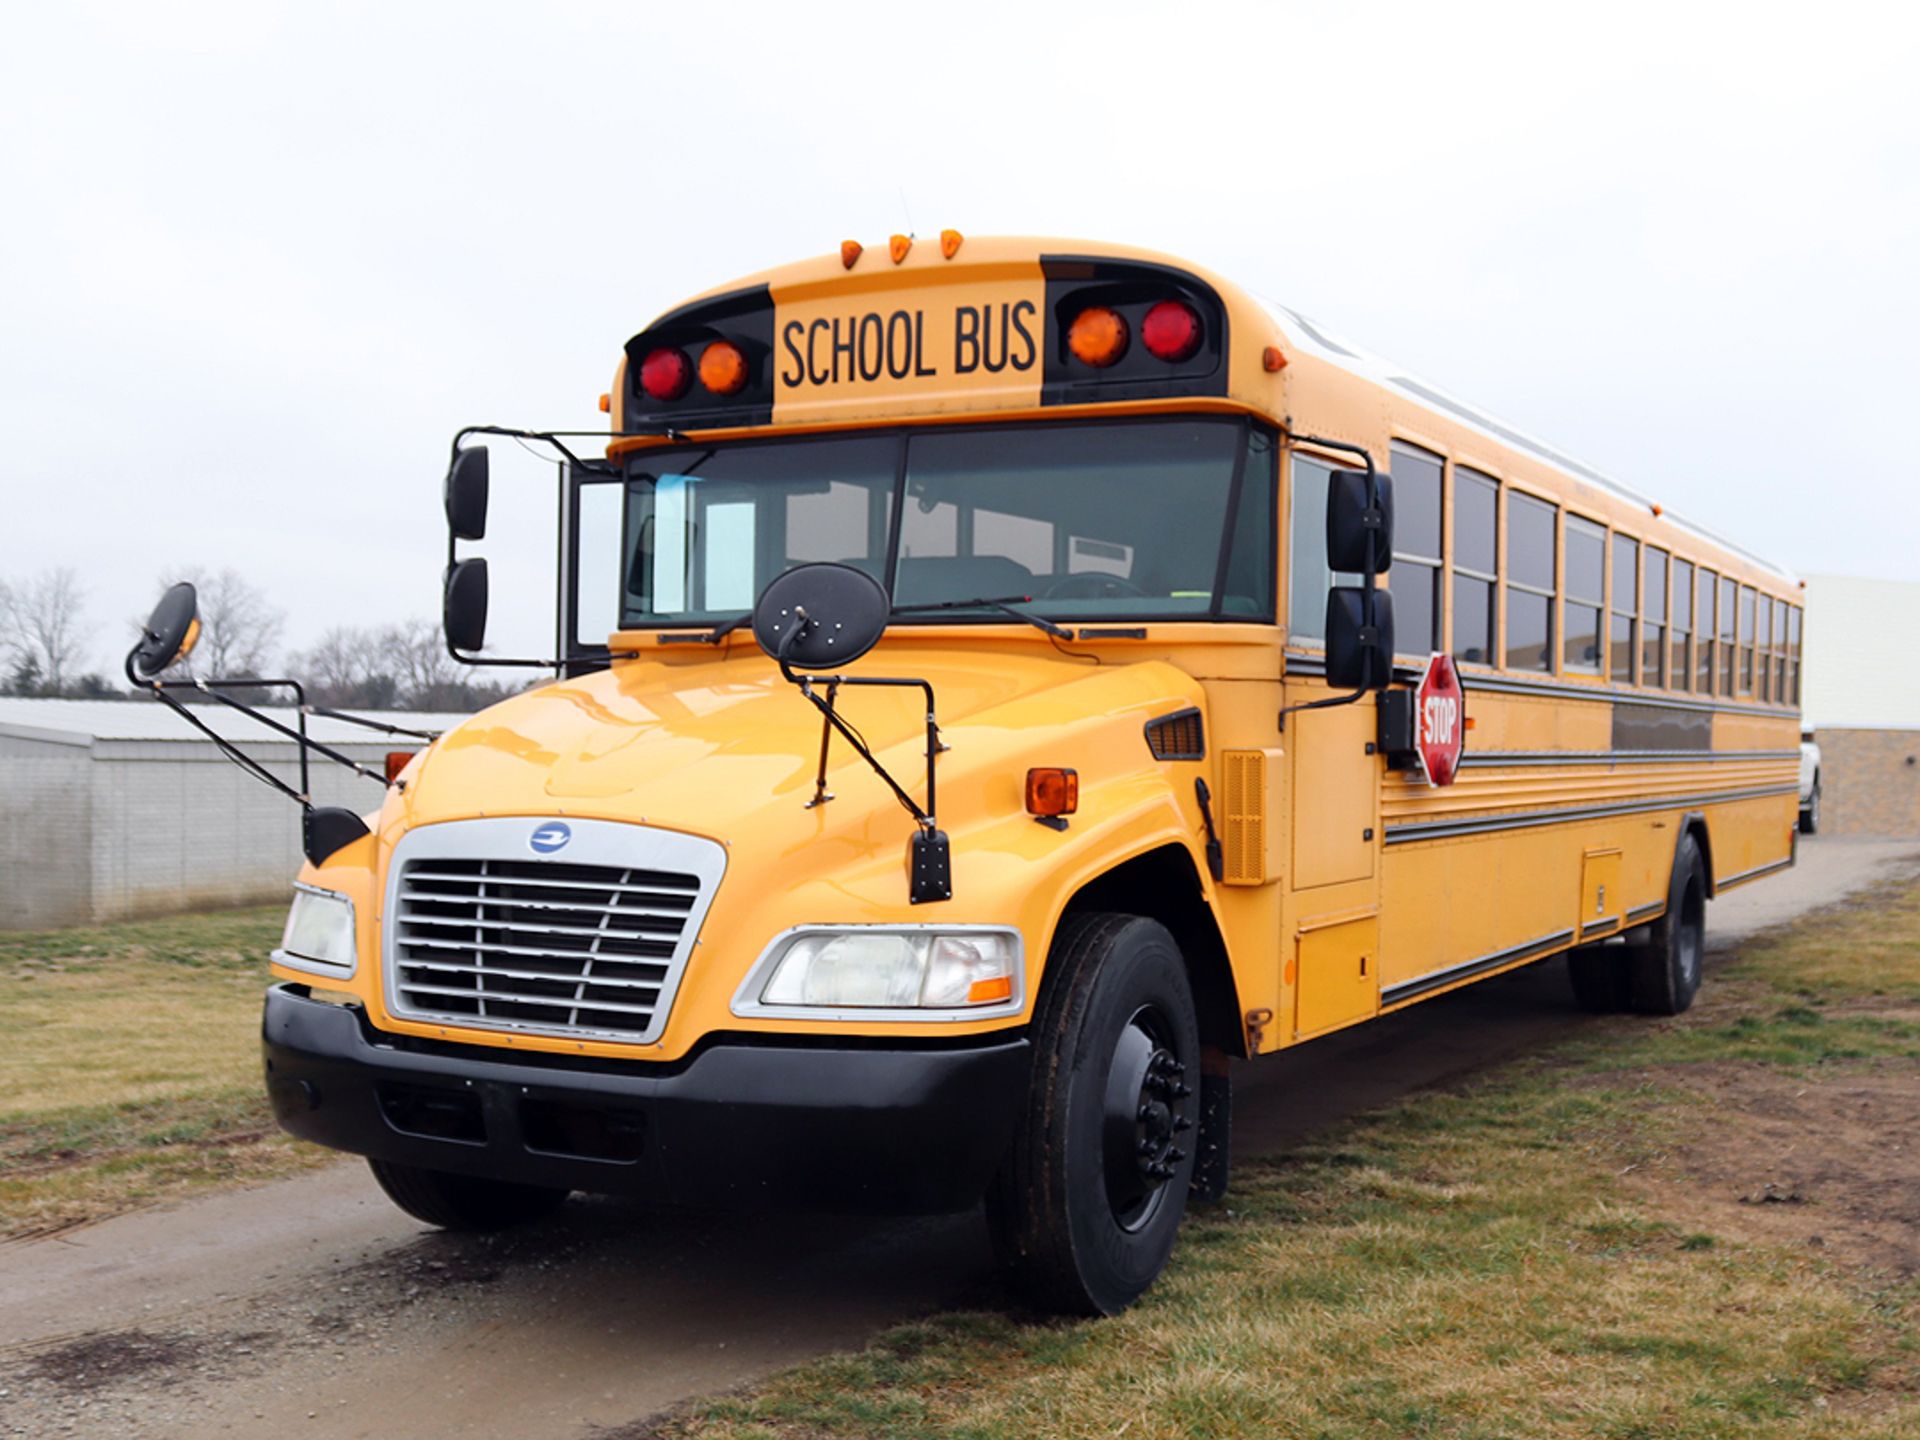 2010 Bluebird School Bus with Cummins Engine, 142k miles, VIN 1BAKJCPAOBF278655 - Image 3 of 16